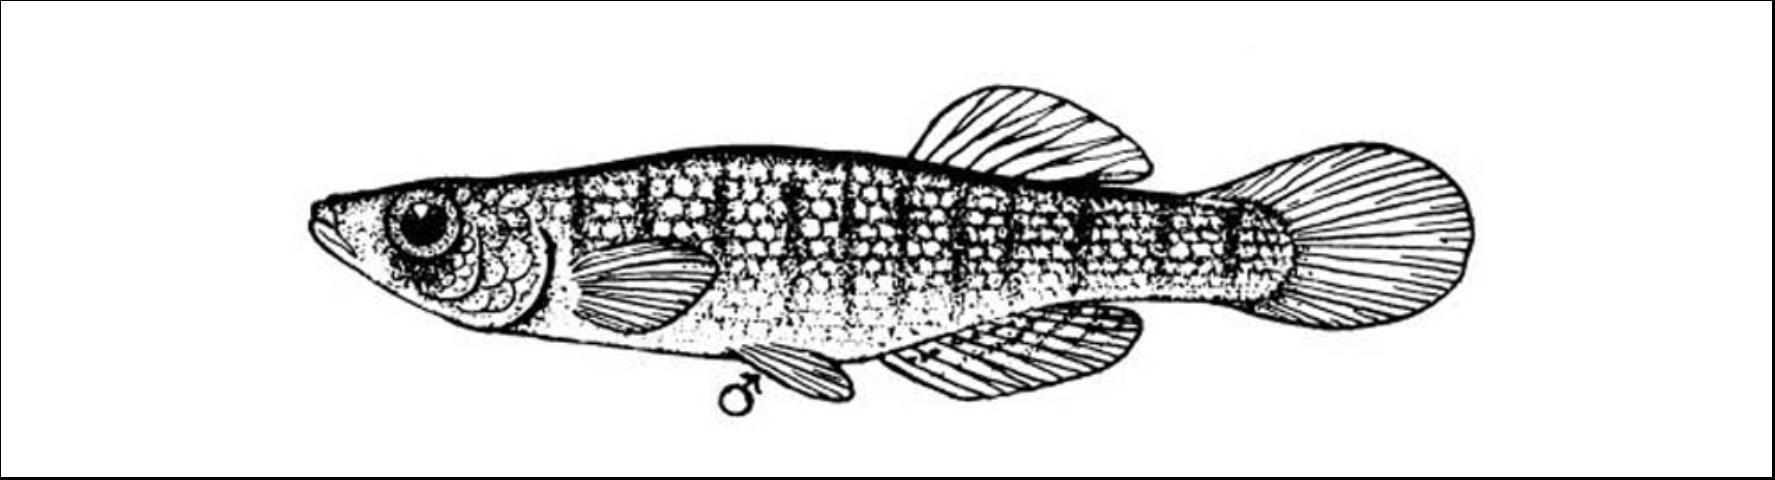 Figure 3. Lined Topminnow (Fundulus lineolatus) to 2 1/2 inches. A surface-inhabiting minnow (topminnow) with vertical lines on their sides. Non-game fish